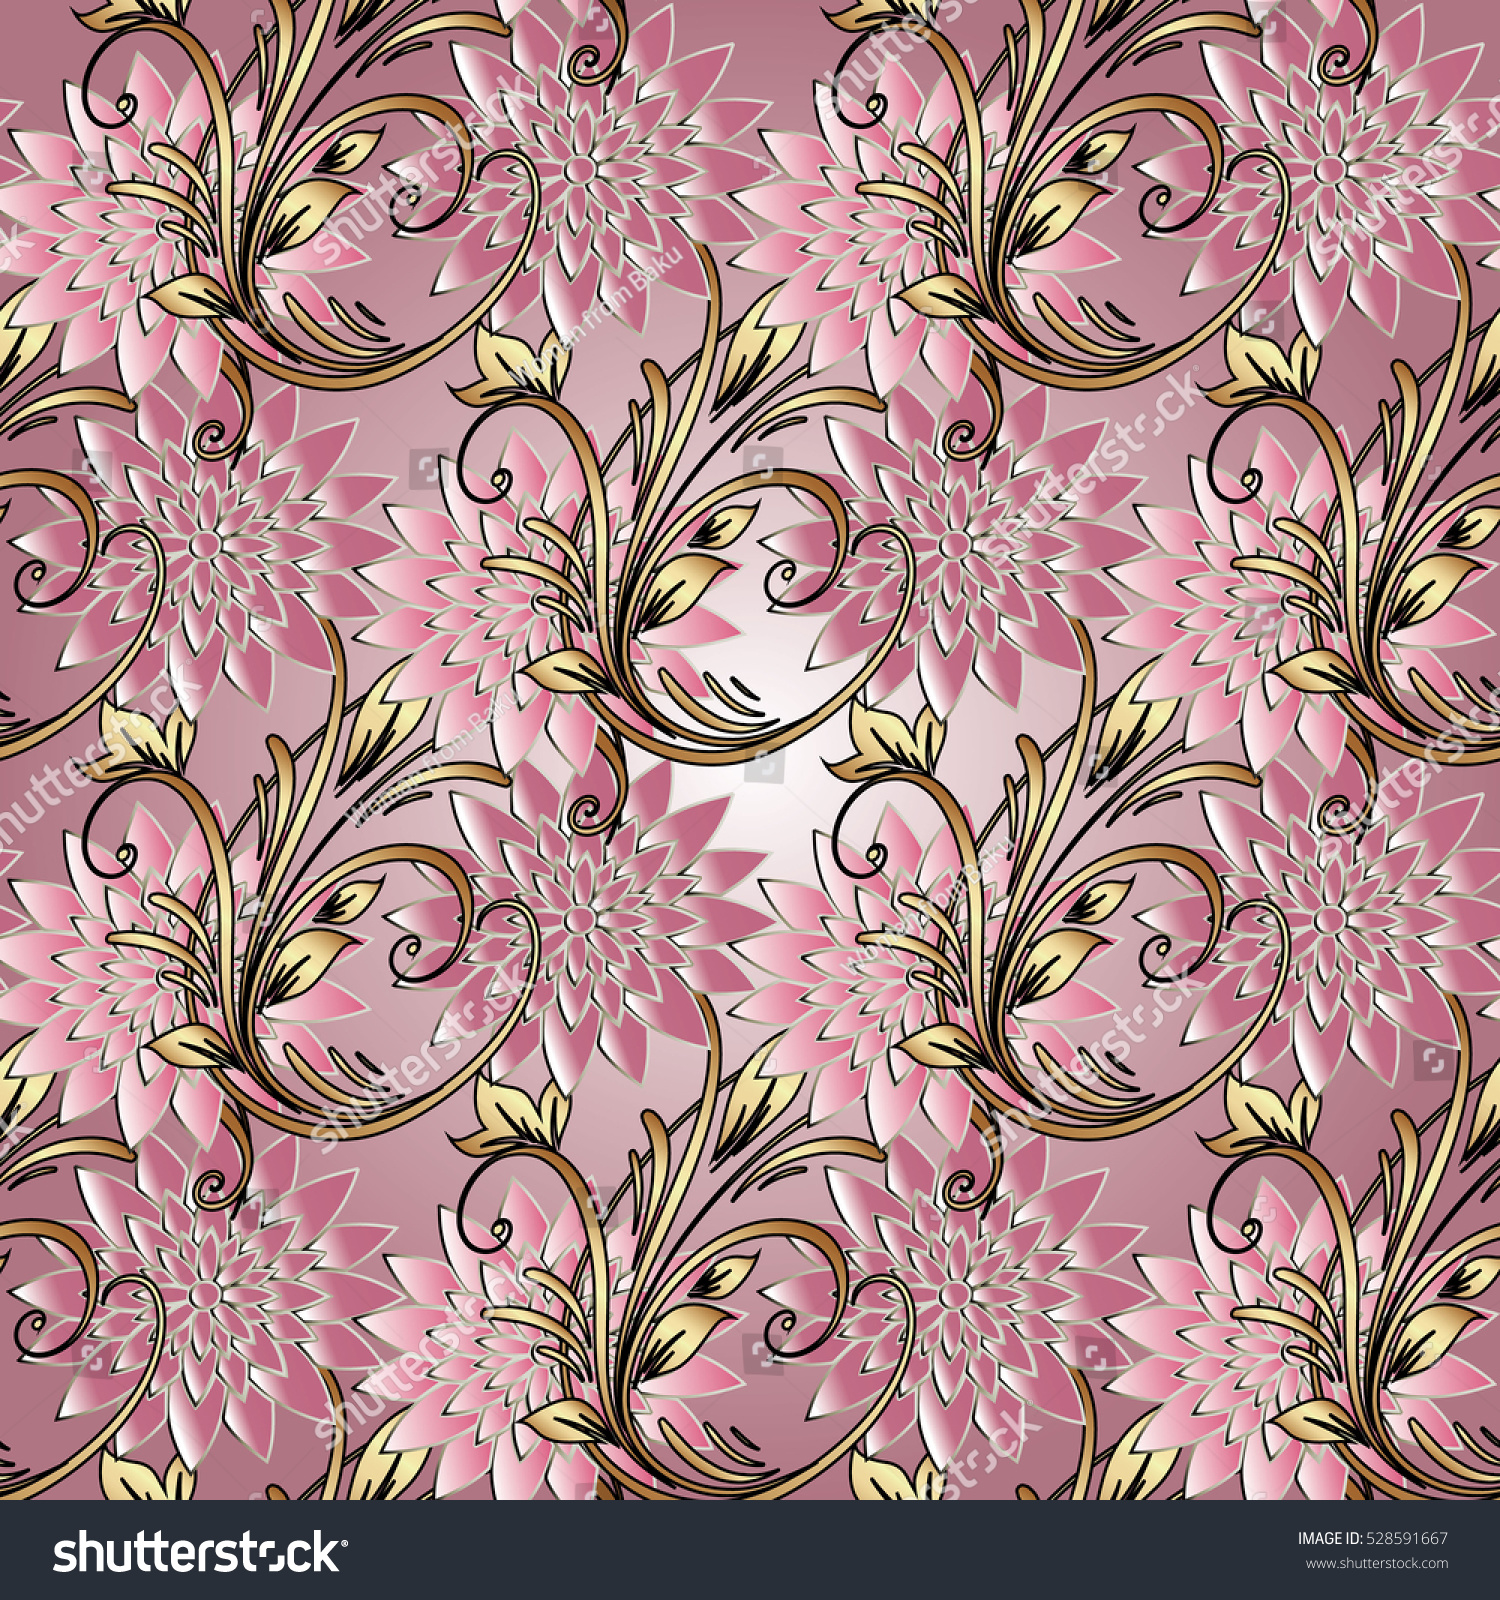 Light Pink Floral Seamless Pattern Abstract Stock Vector Royalty